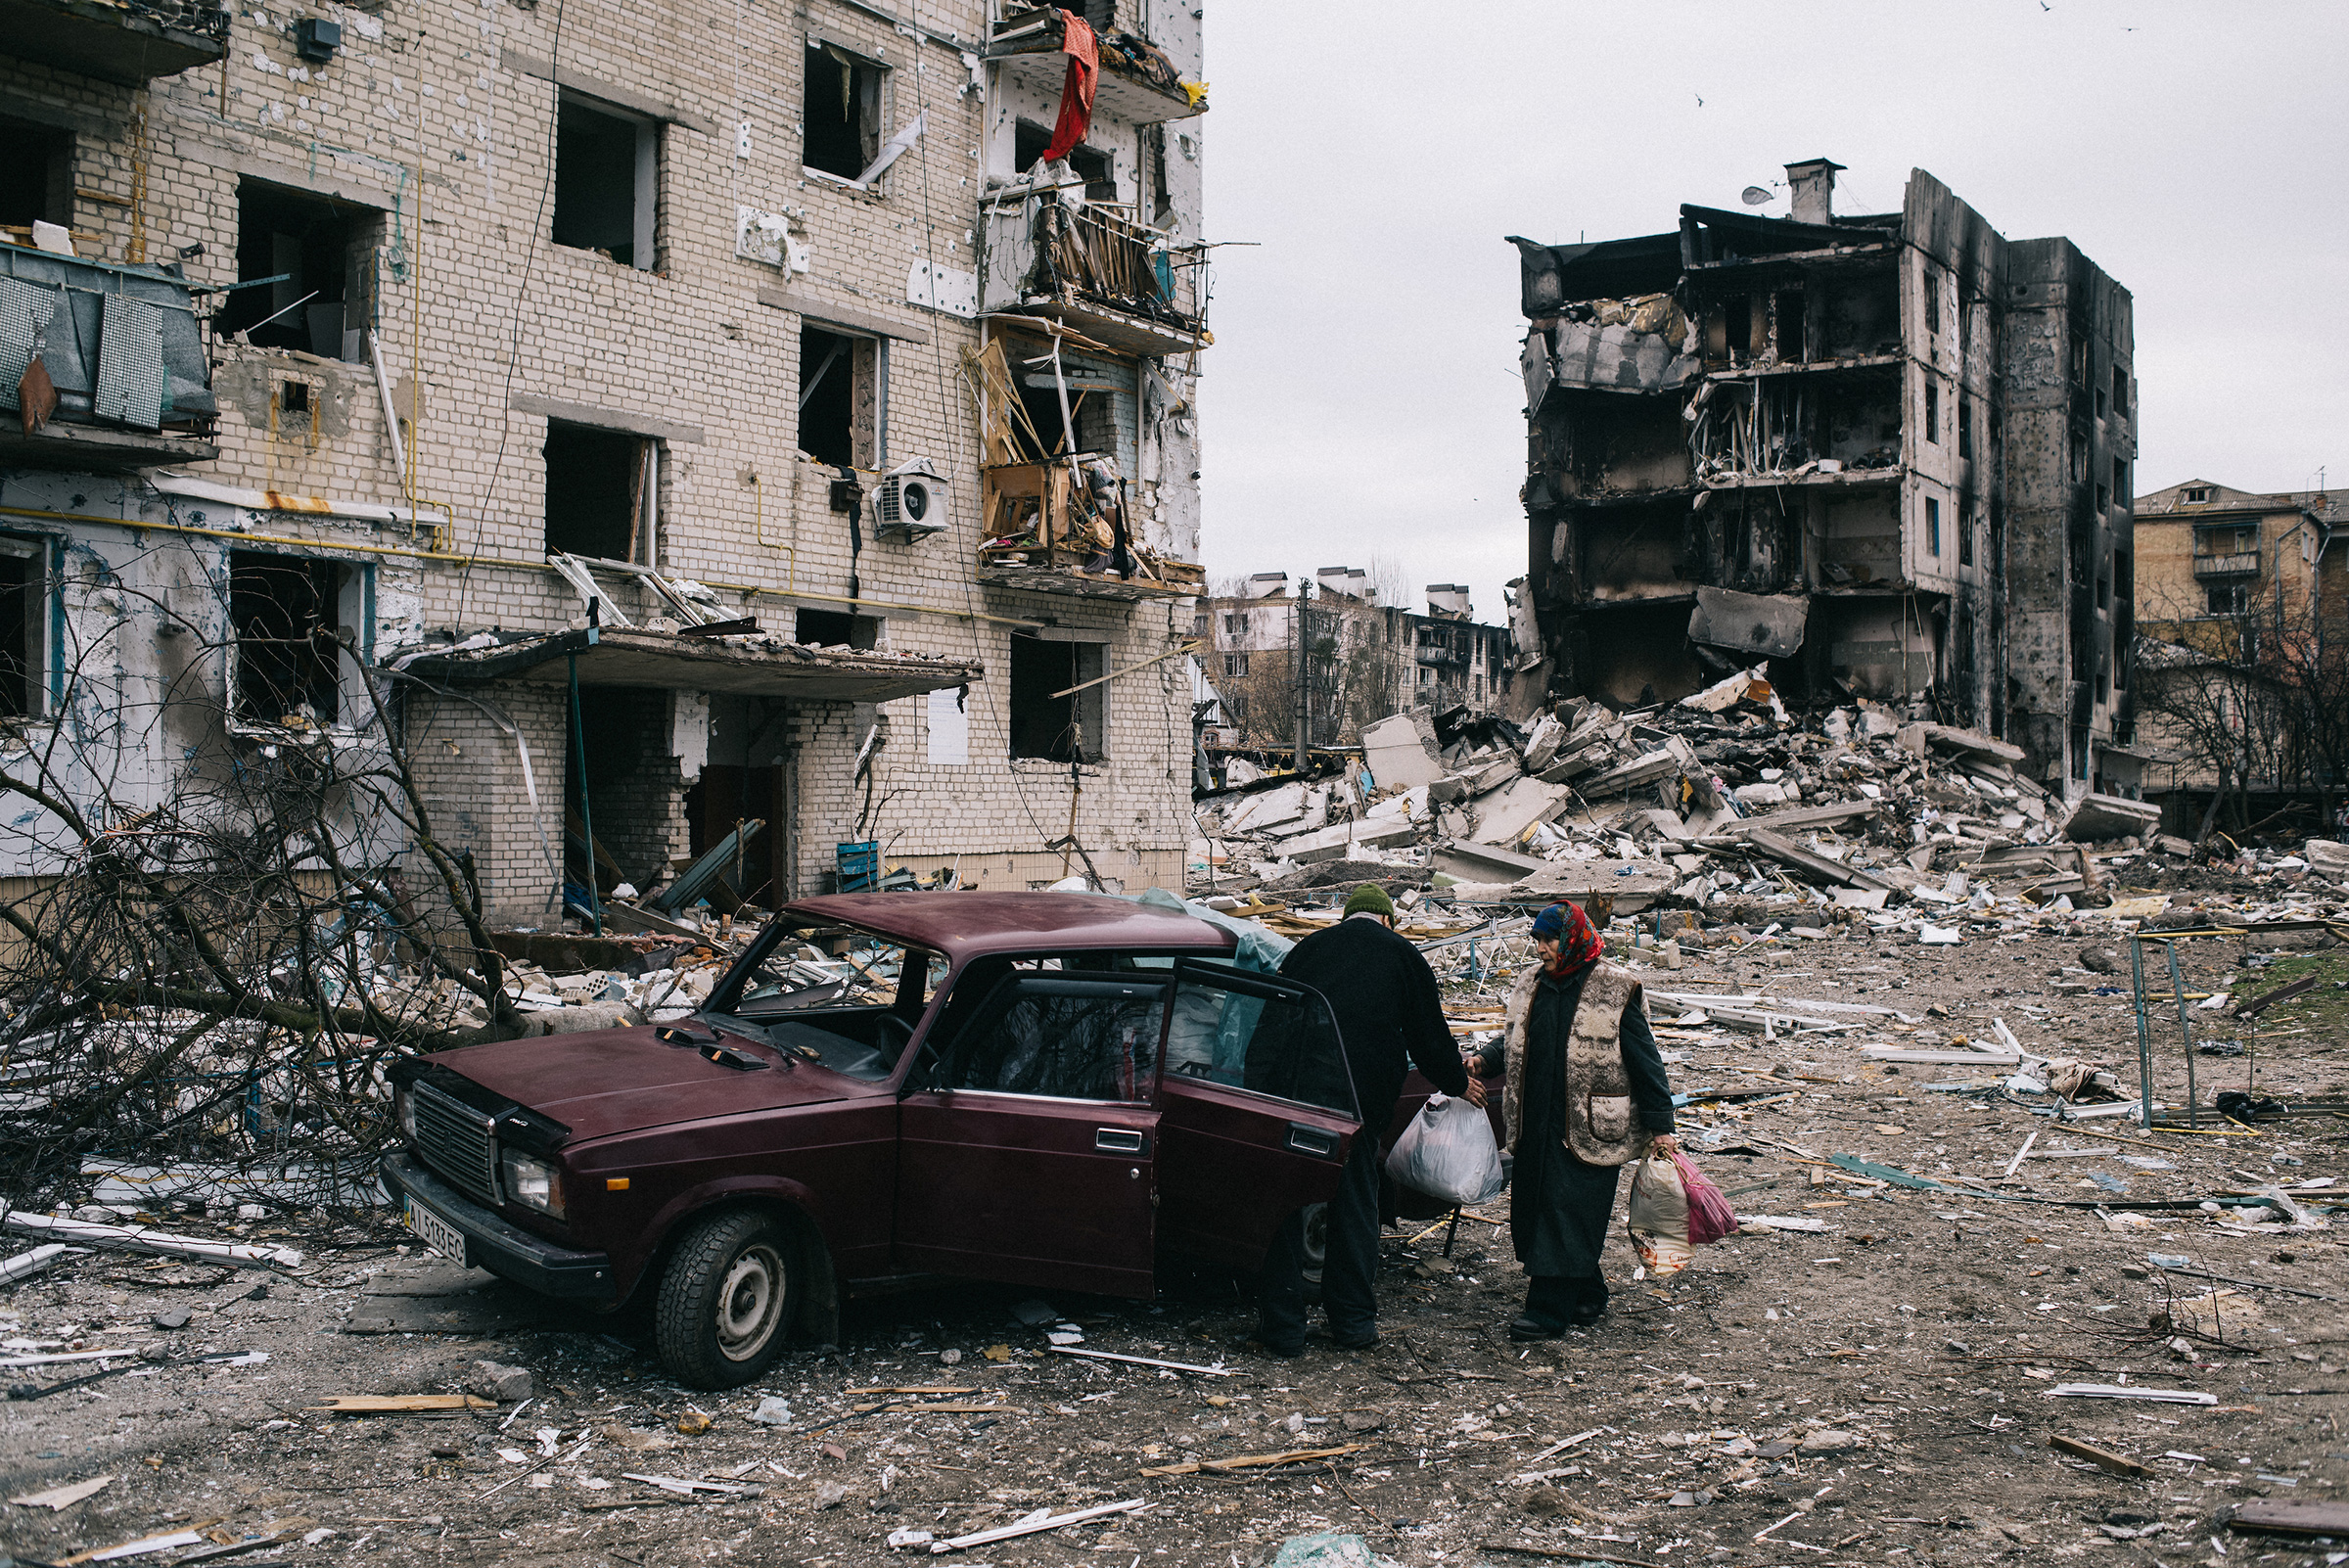 The town of Borodyanka may have faced some the worst attacks since Russia launched its invasion of Ukraine. A "ruined town" strewn with destroyed buildings and burnt armored vehicles. School buildings, homes and apartments in the town center were severely damaged as a result of air and ground strikes. On the photo an elderly couple collects things survived from in a bombed apartment and going to leave on a car. The town of Borodyanka, Kyiv region, 05.04.2022